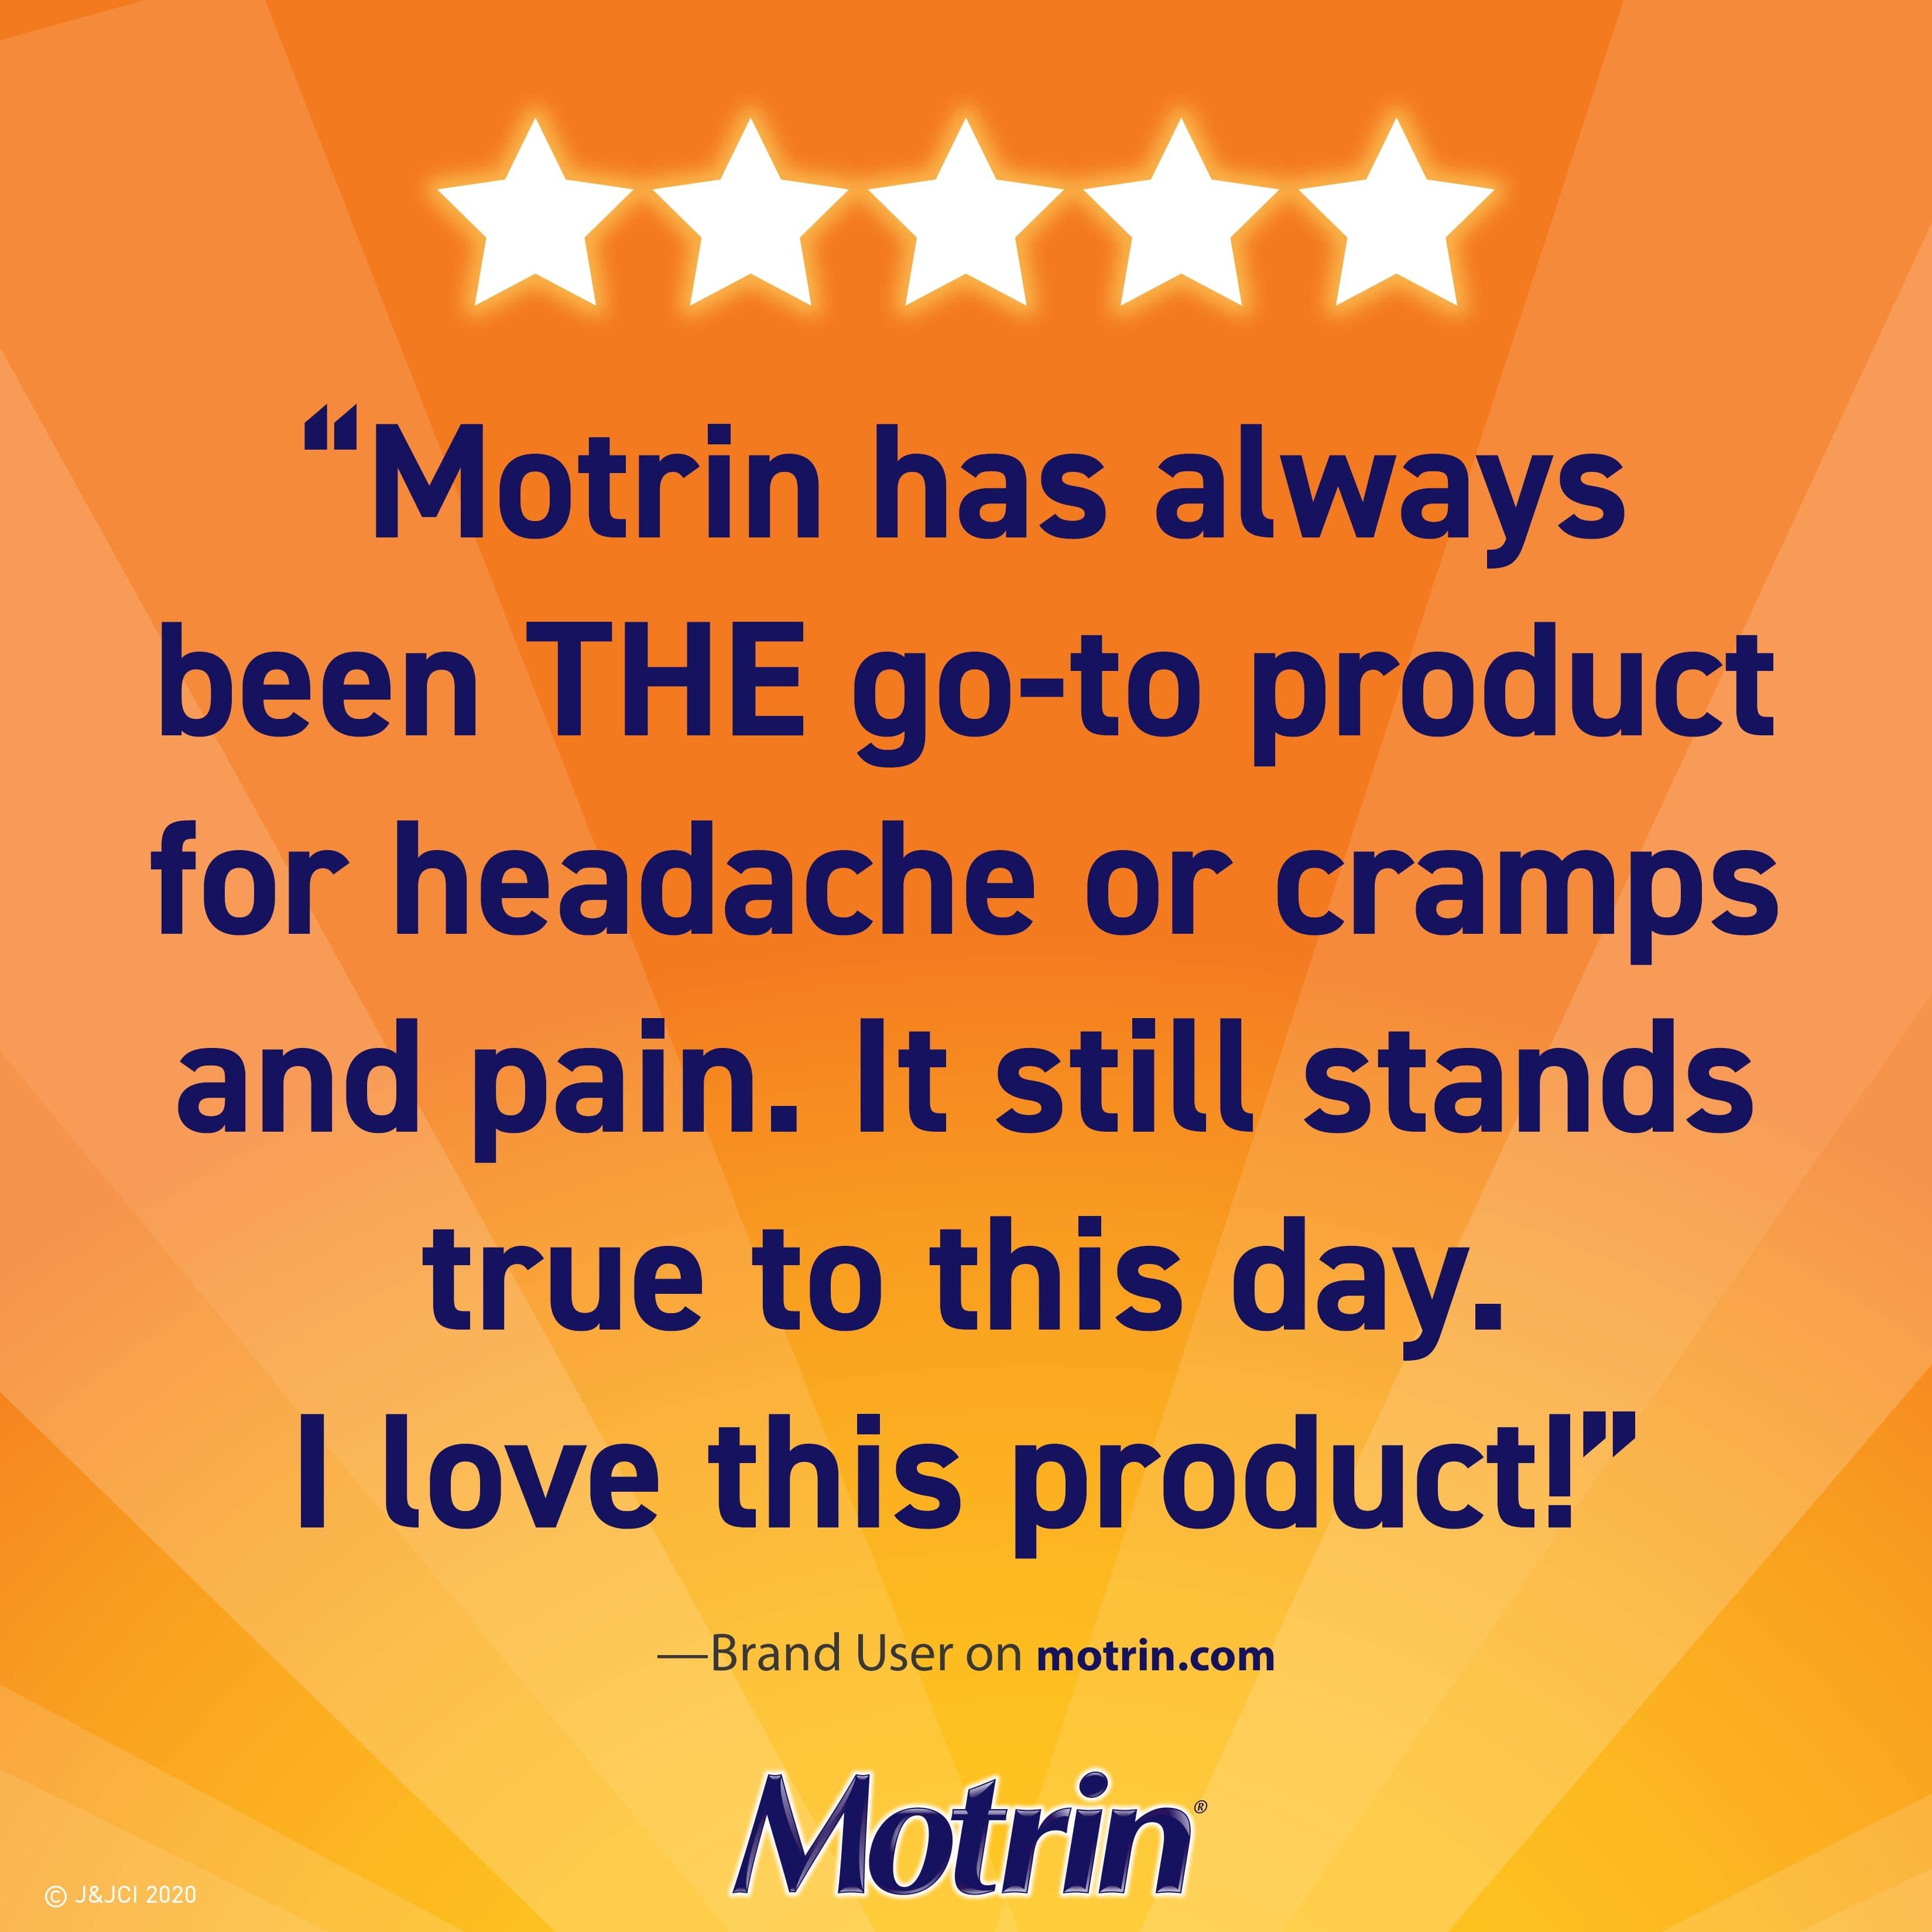 Motrin "I love this product" review